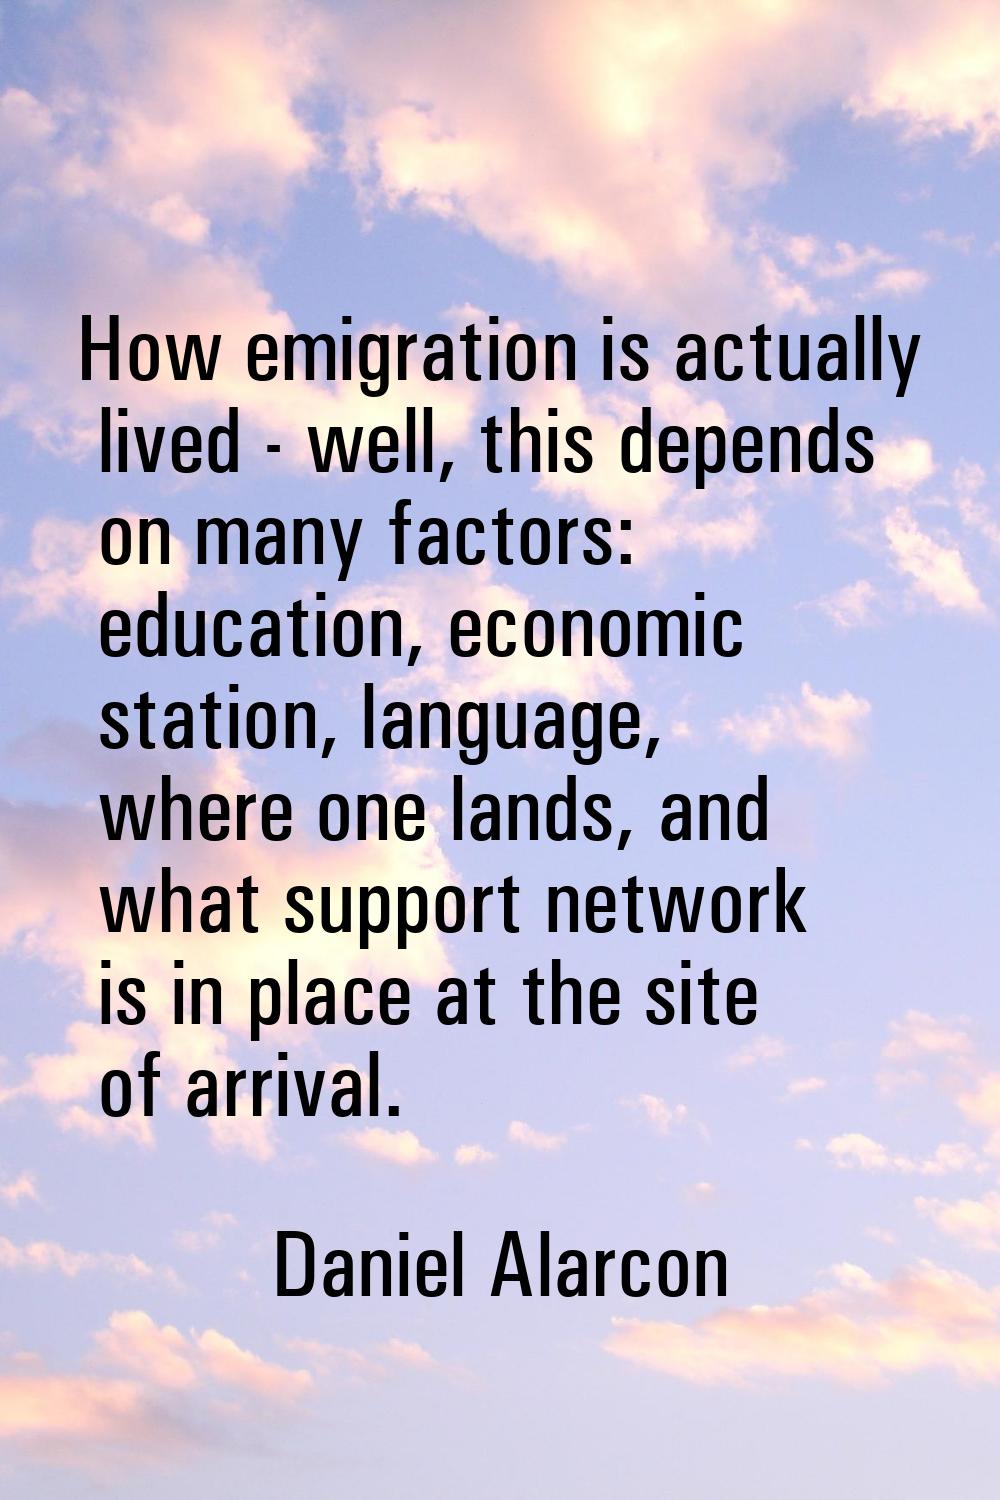 How emigration is actually lived - well, this depends on many factors: education, economic station,